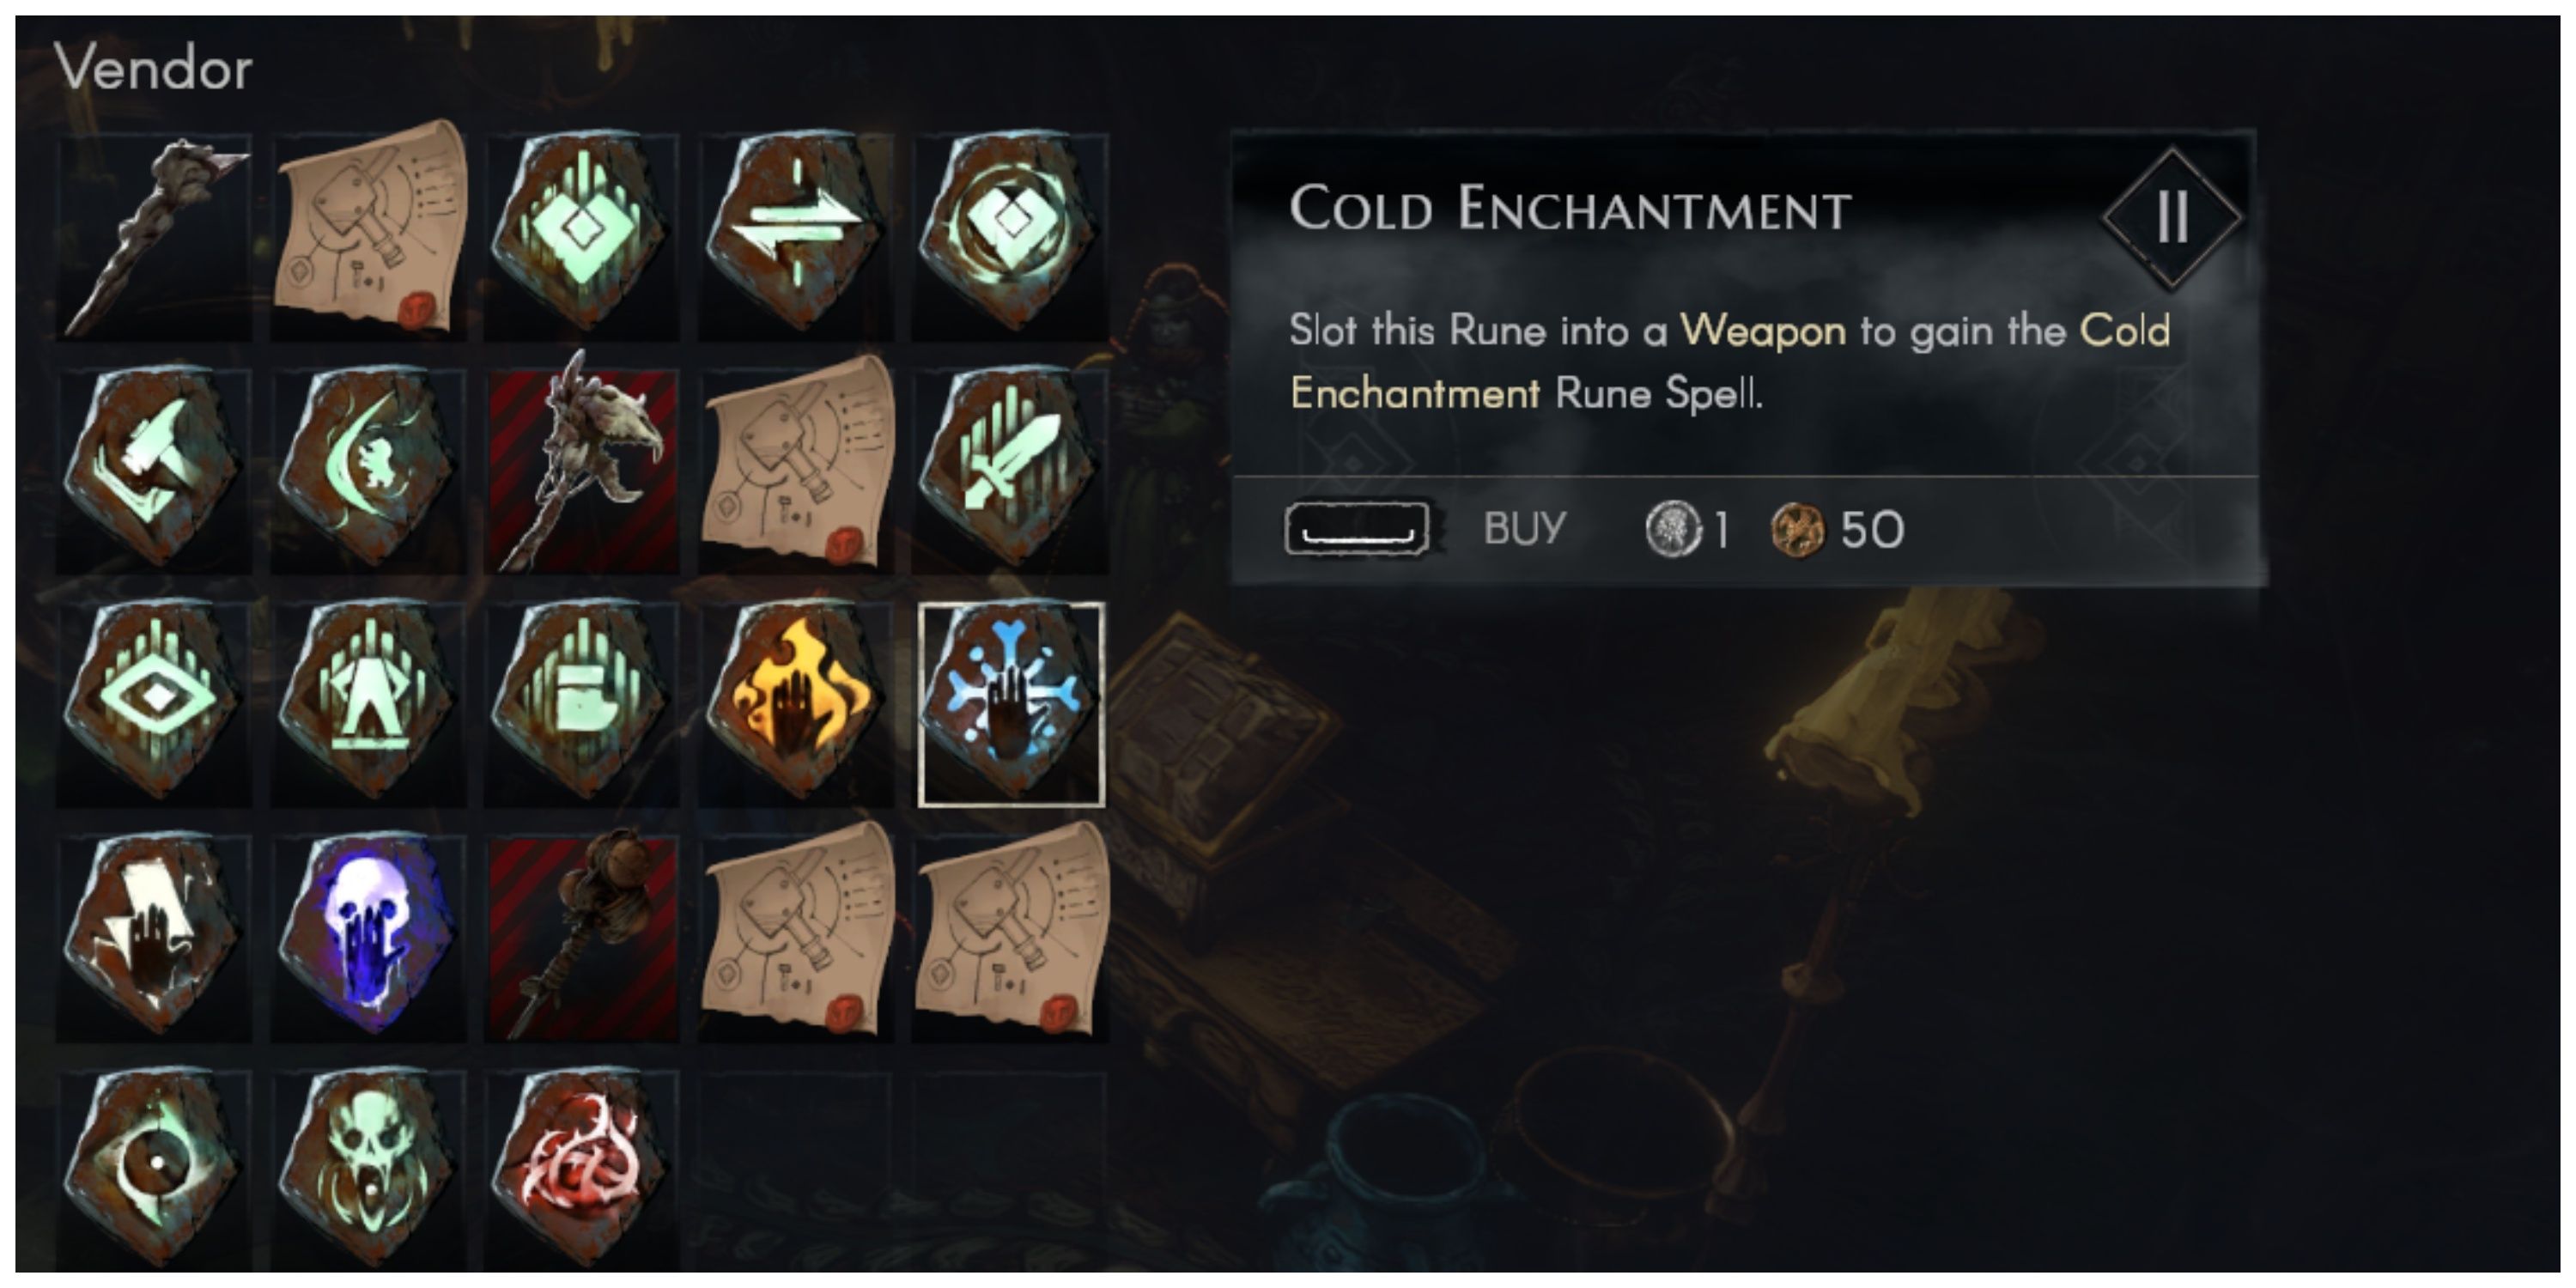 No Rest For The Wicked - Cold Enchantment Rune